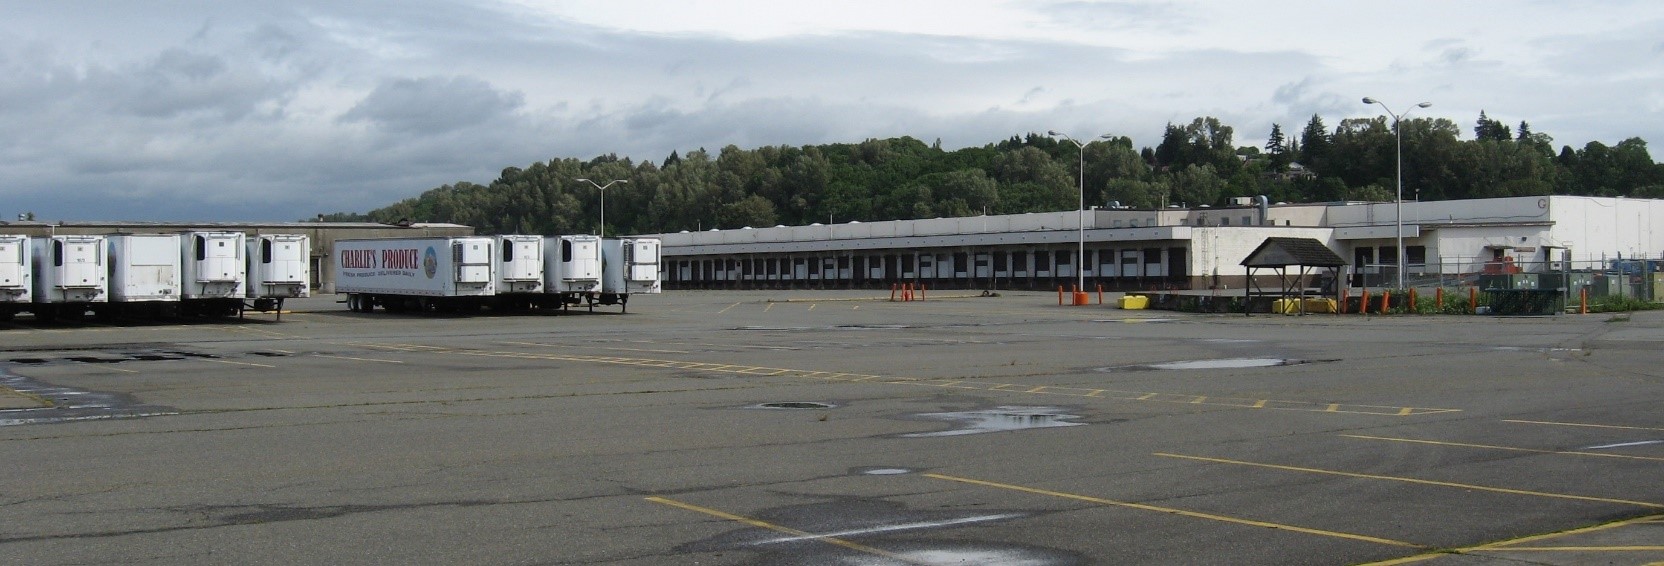 Several refrigerated semi truck trailers are parked in a row on the left. On the right is a long loading dock of a warehouse. A tree covered hill is in the background.